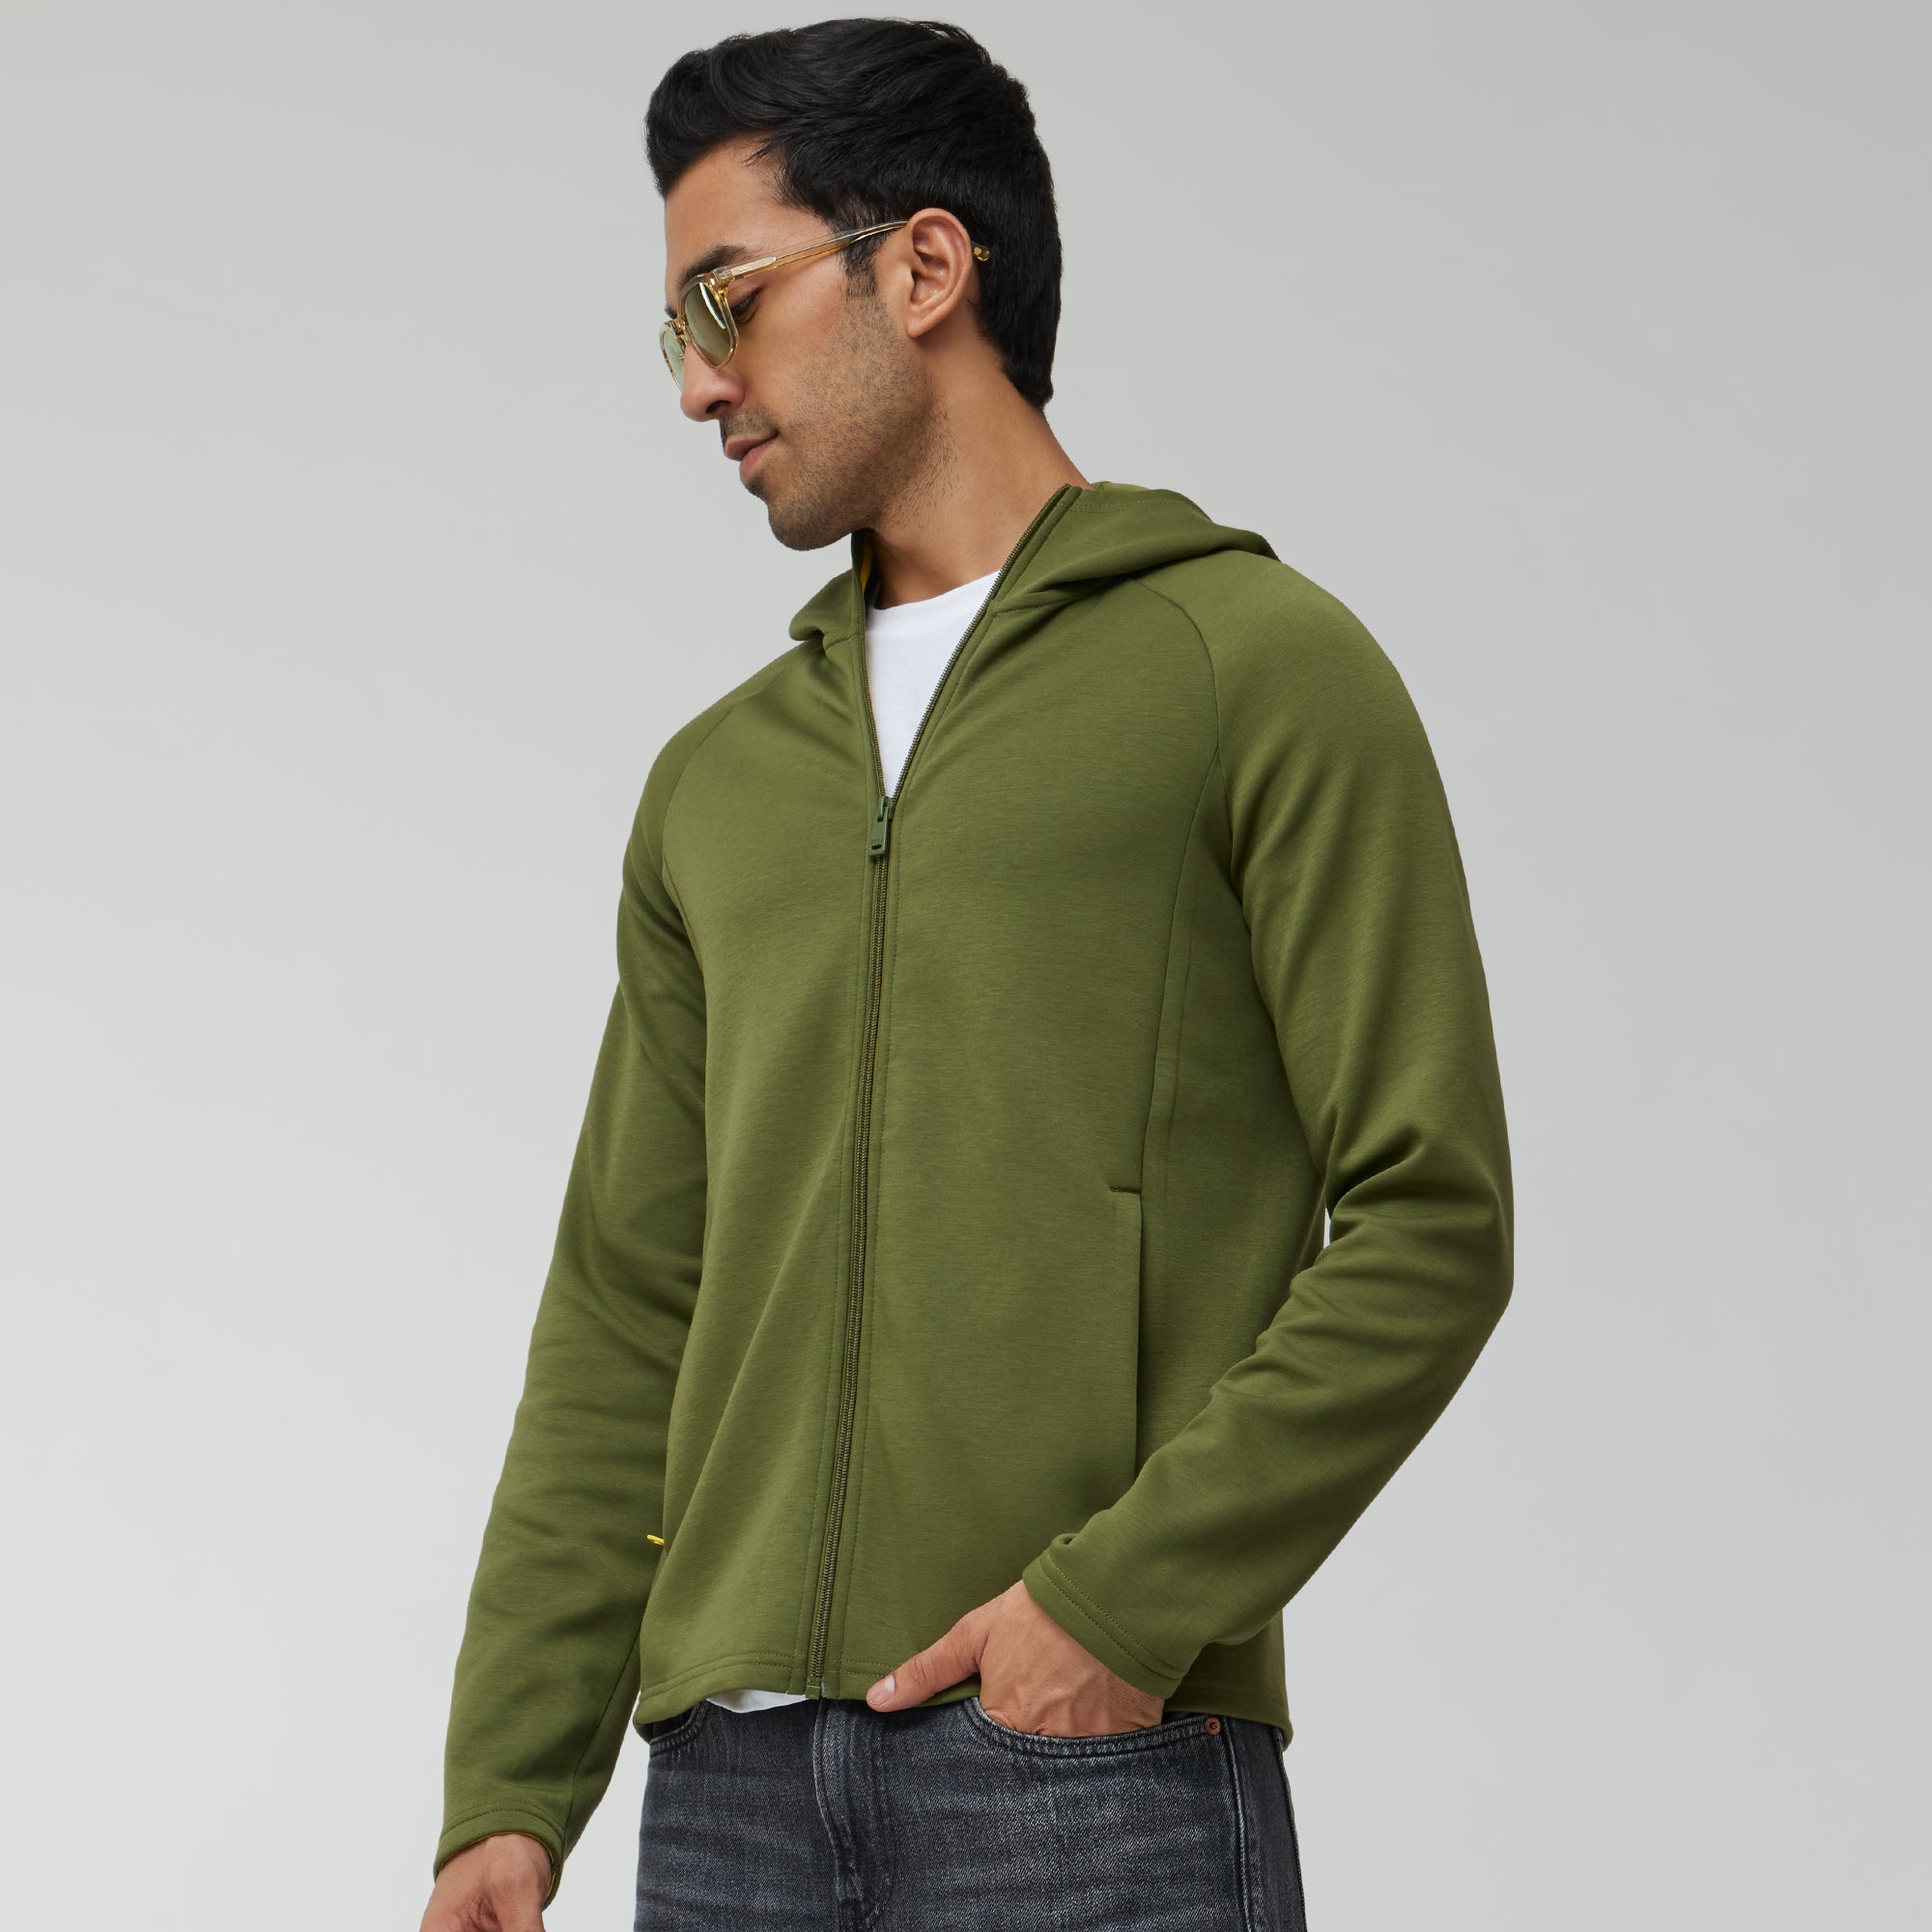 Alpha Hoodies and Jackets For Men Olive Green -  XYXX Crew